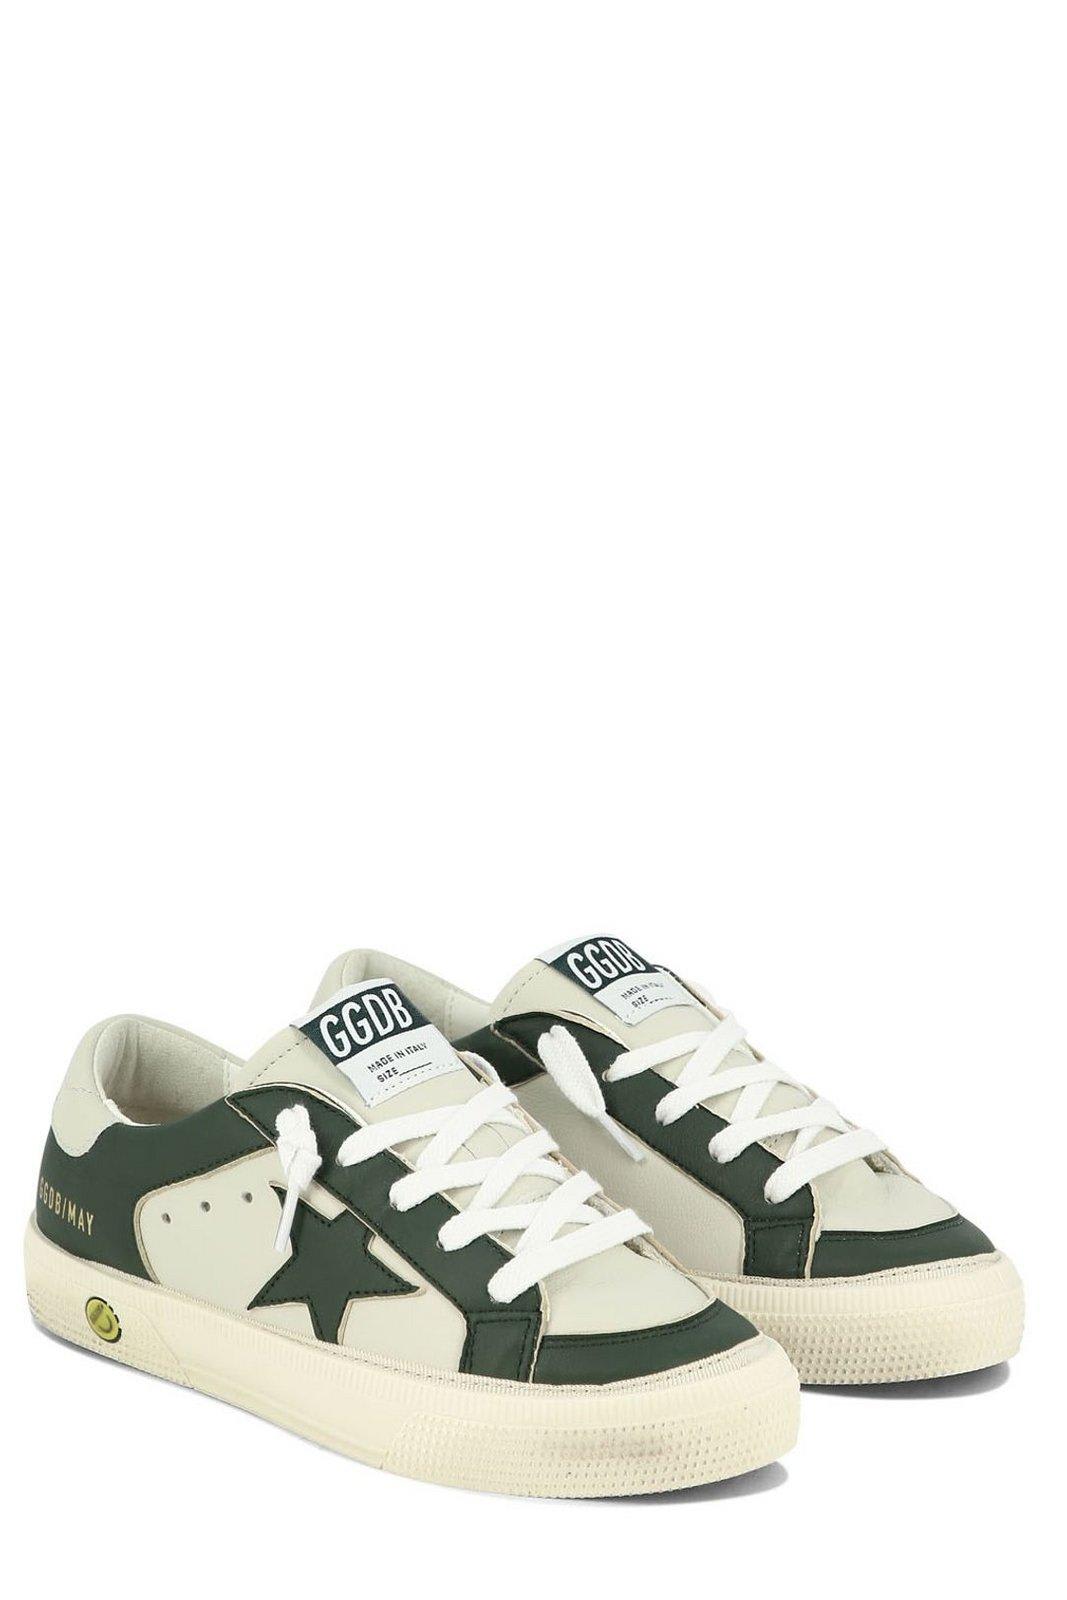 Shop Golden Goose Star Patch Lace-up Sneakers